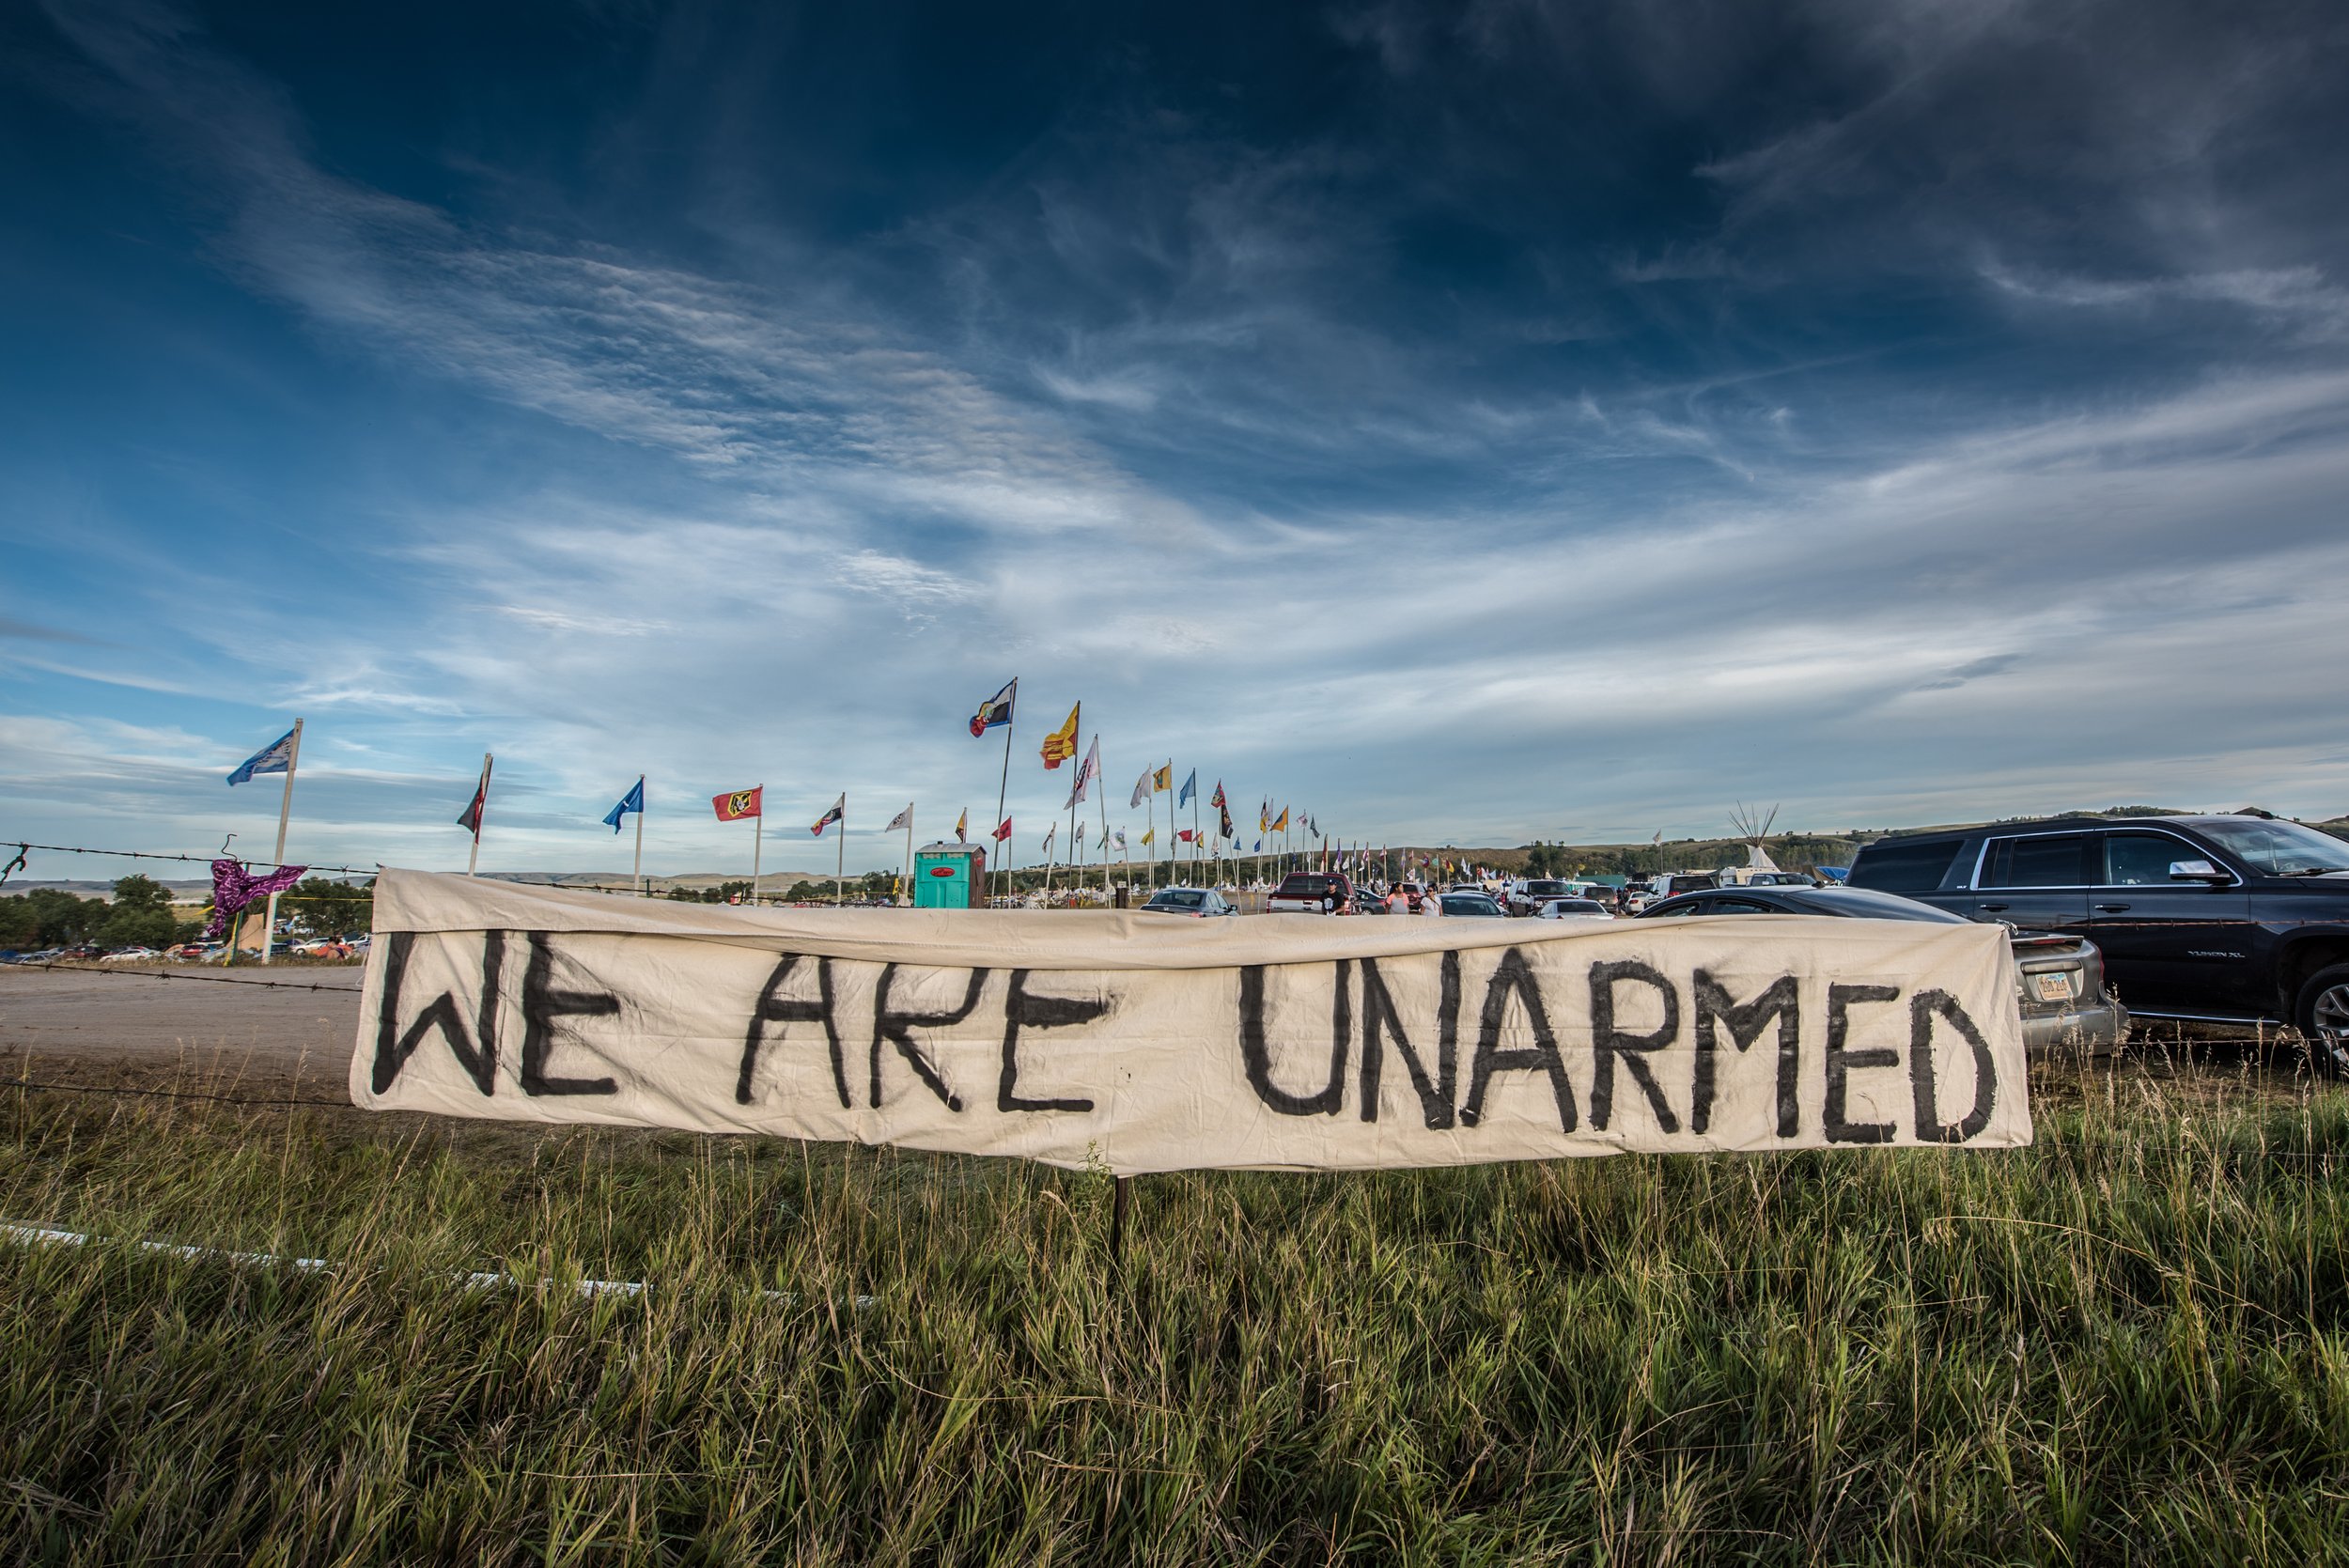  This large banner hung at the edge of the Oceti Sakowin encampment at Standing Rock, adjacent to ND Highway 1806. The impetus for this banner was over concerns that police were concerned that weapons existed within the encampment. 